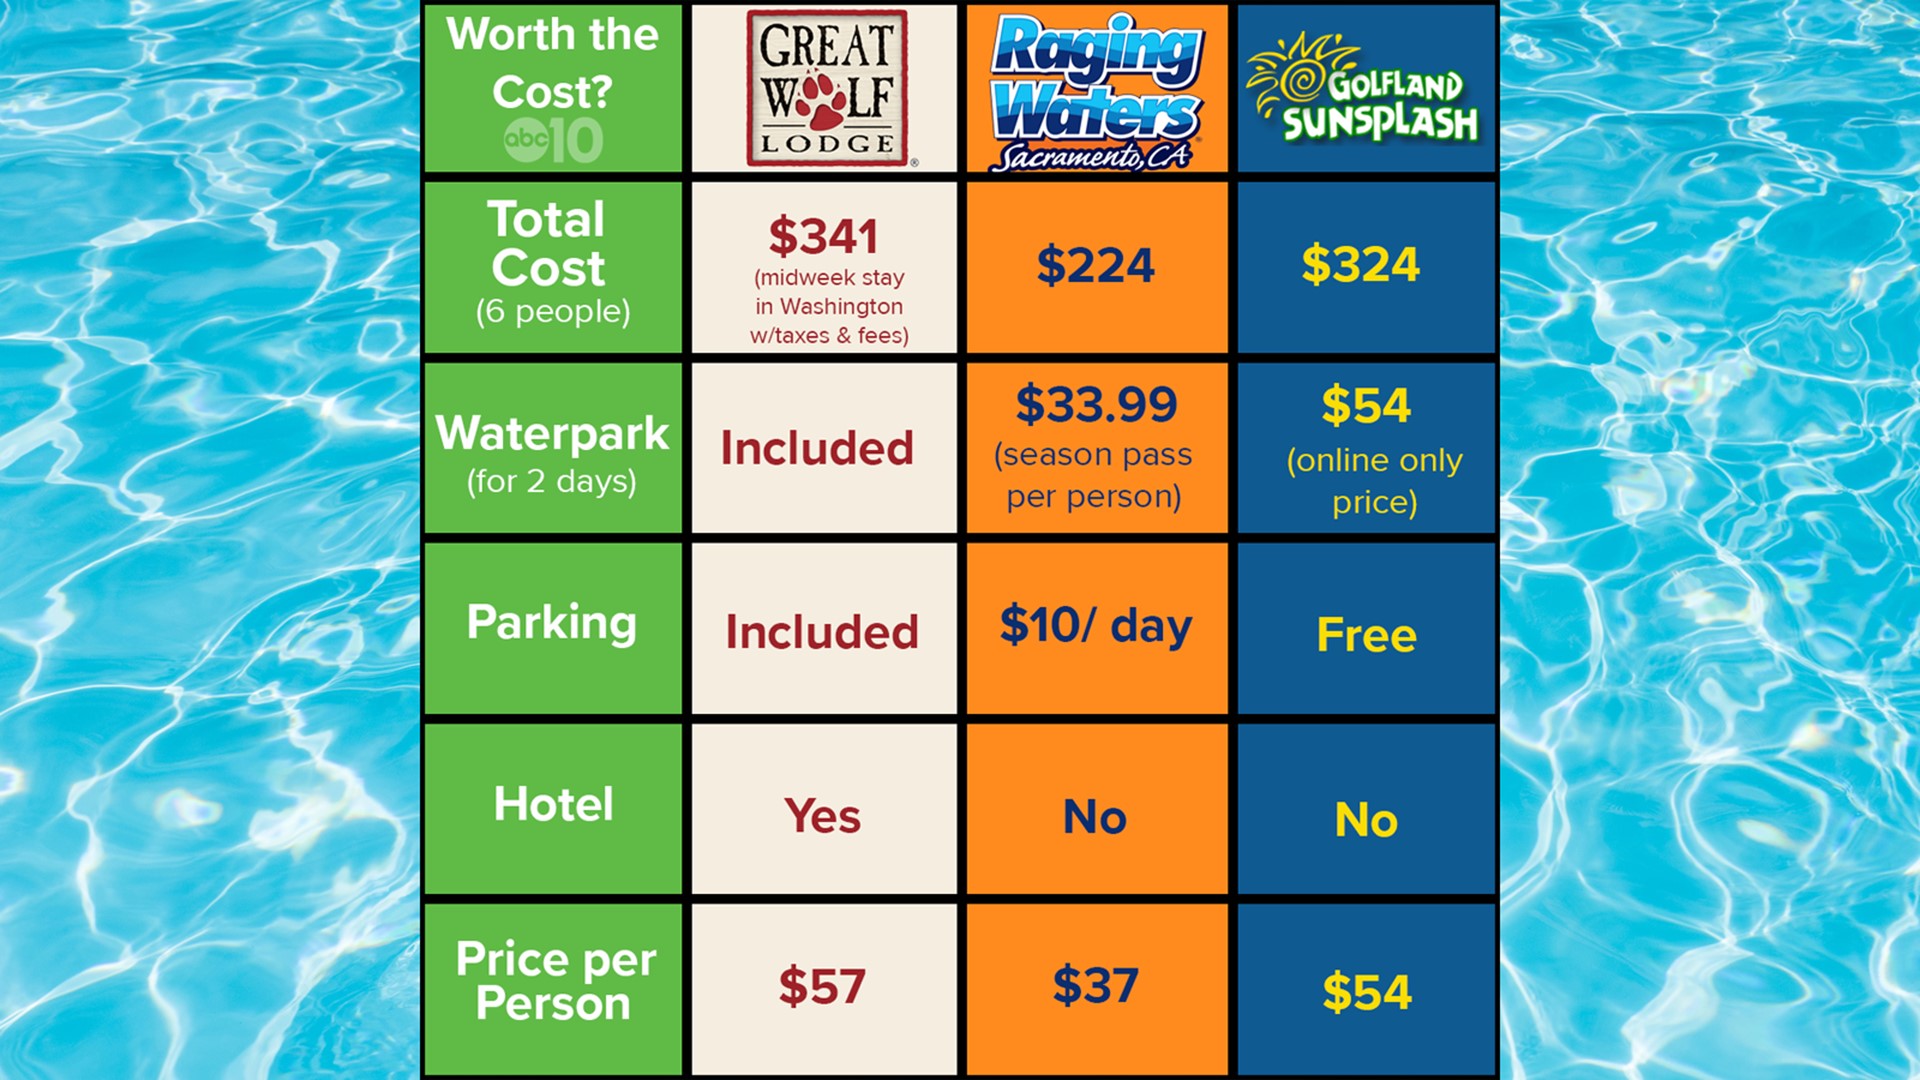 Is Great Wolf Lodge worth the cost?